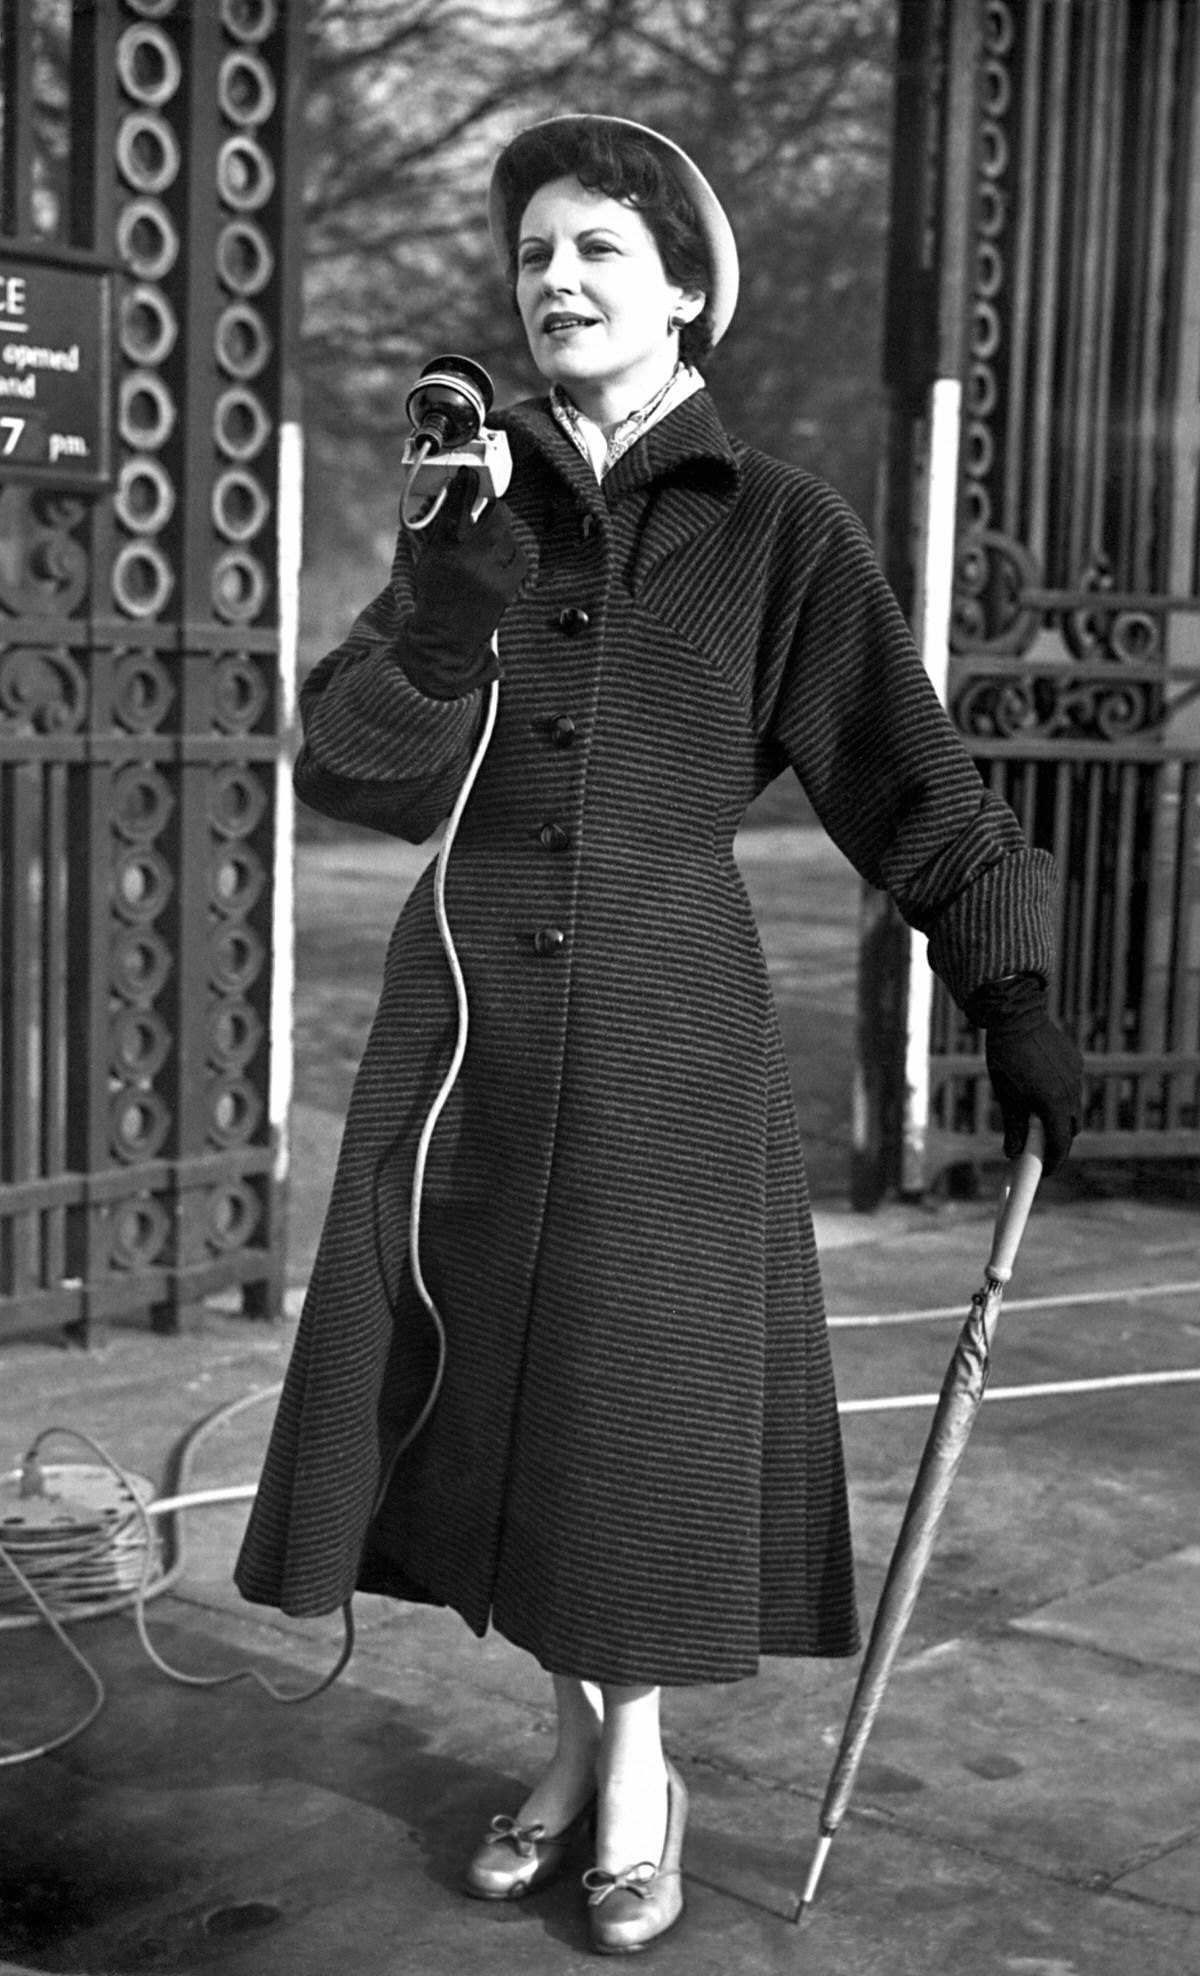 Microphone and umbrella in hand, Manchester born broadcaster Jessica Dunning makes an outside broadcast in an audition for commentators for the Coronation.